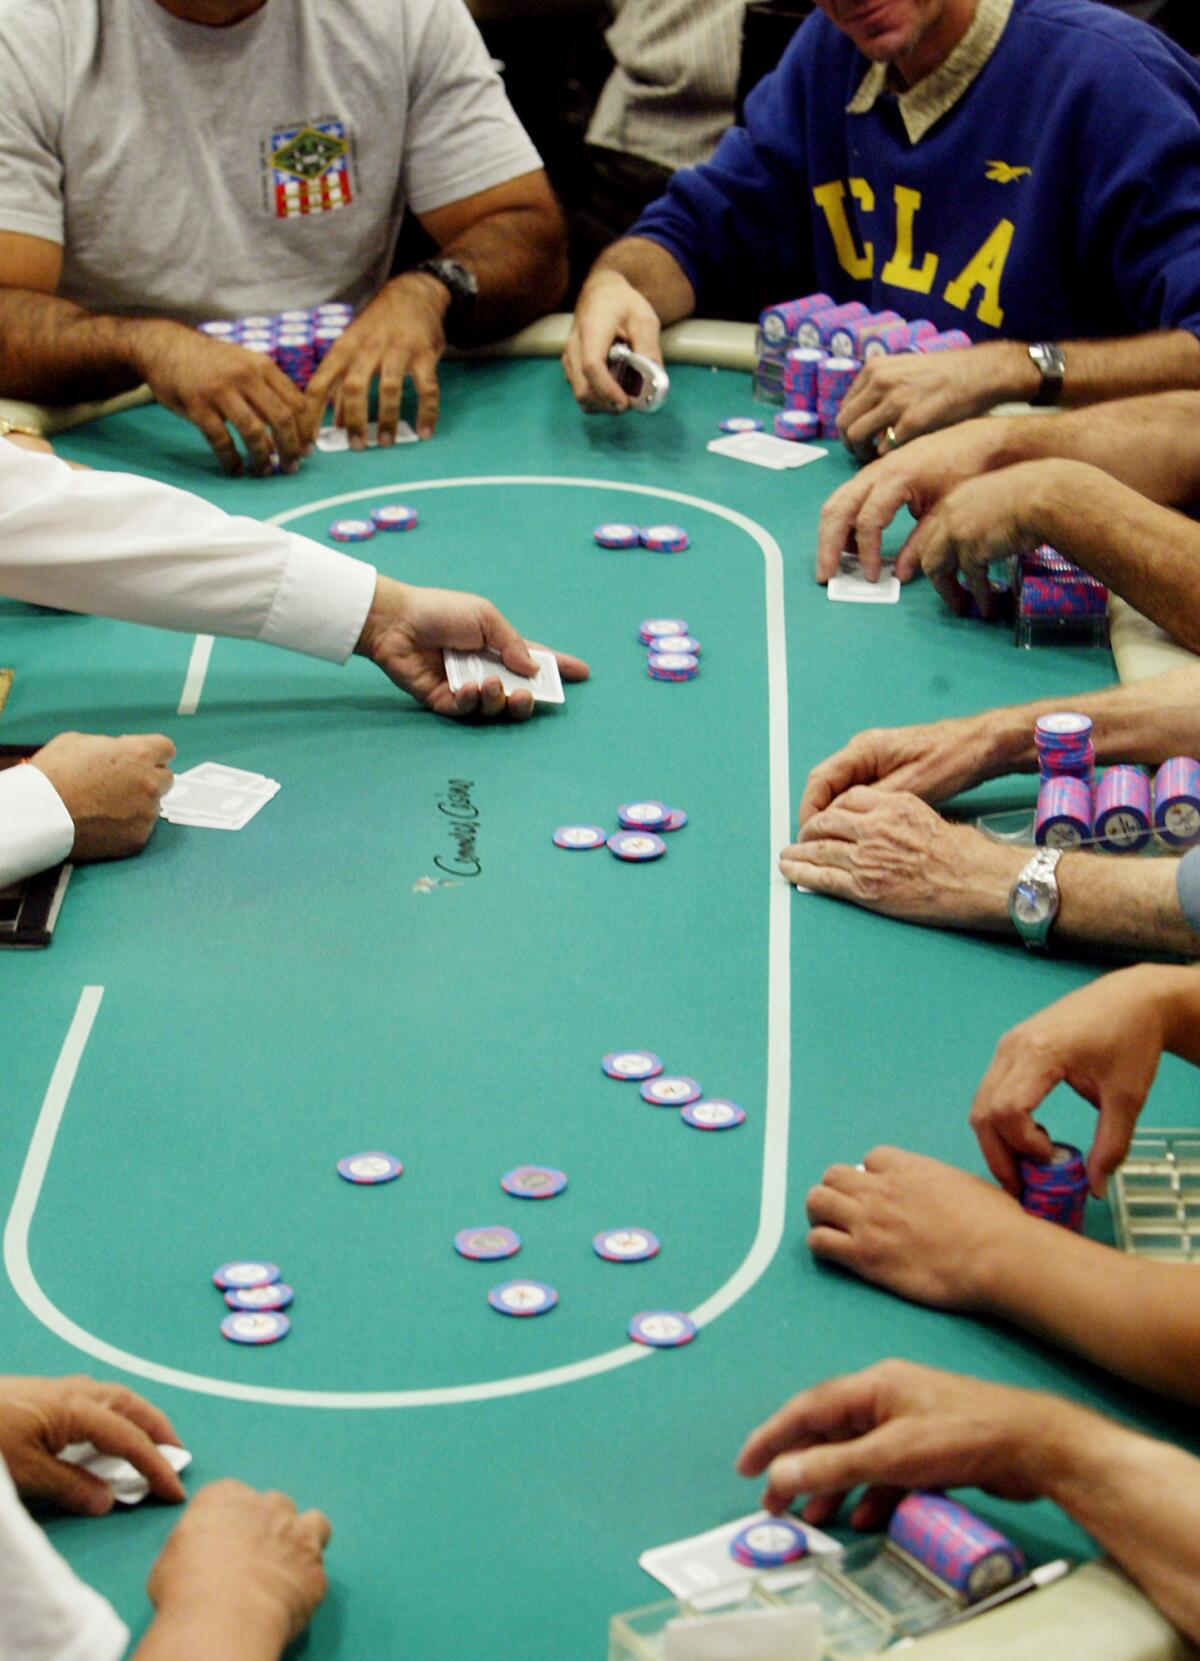 Chips and cards go around the gambling table at the Commerce Casino. The Legislature might look at regulations and taxes involving the gambling industry in the state.